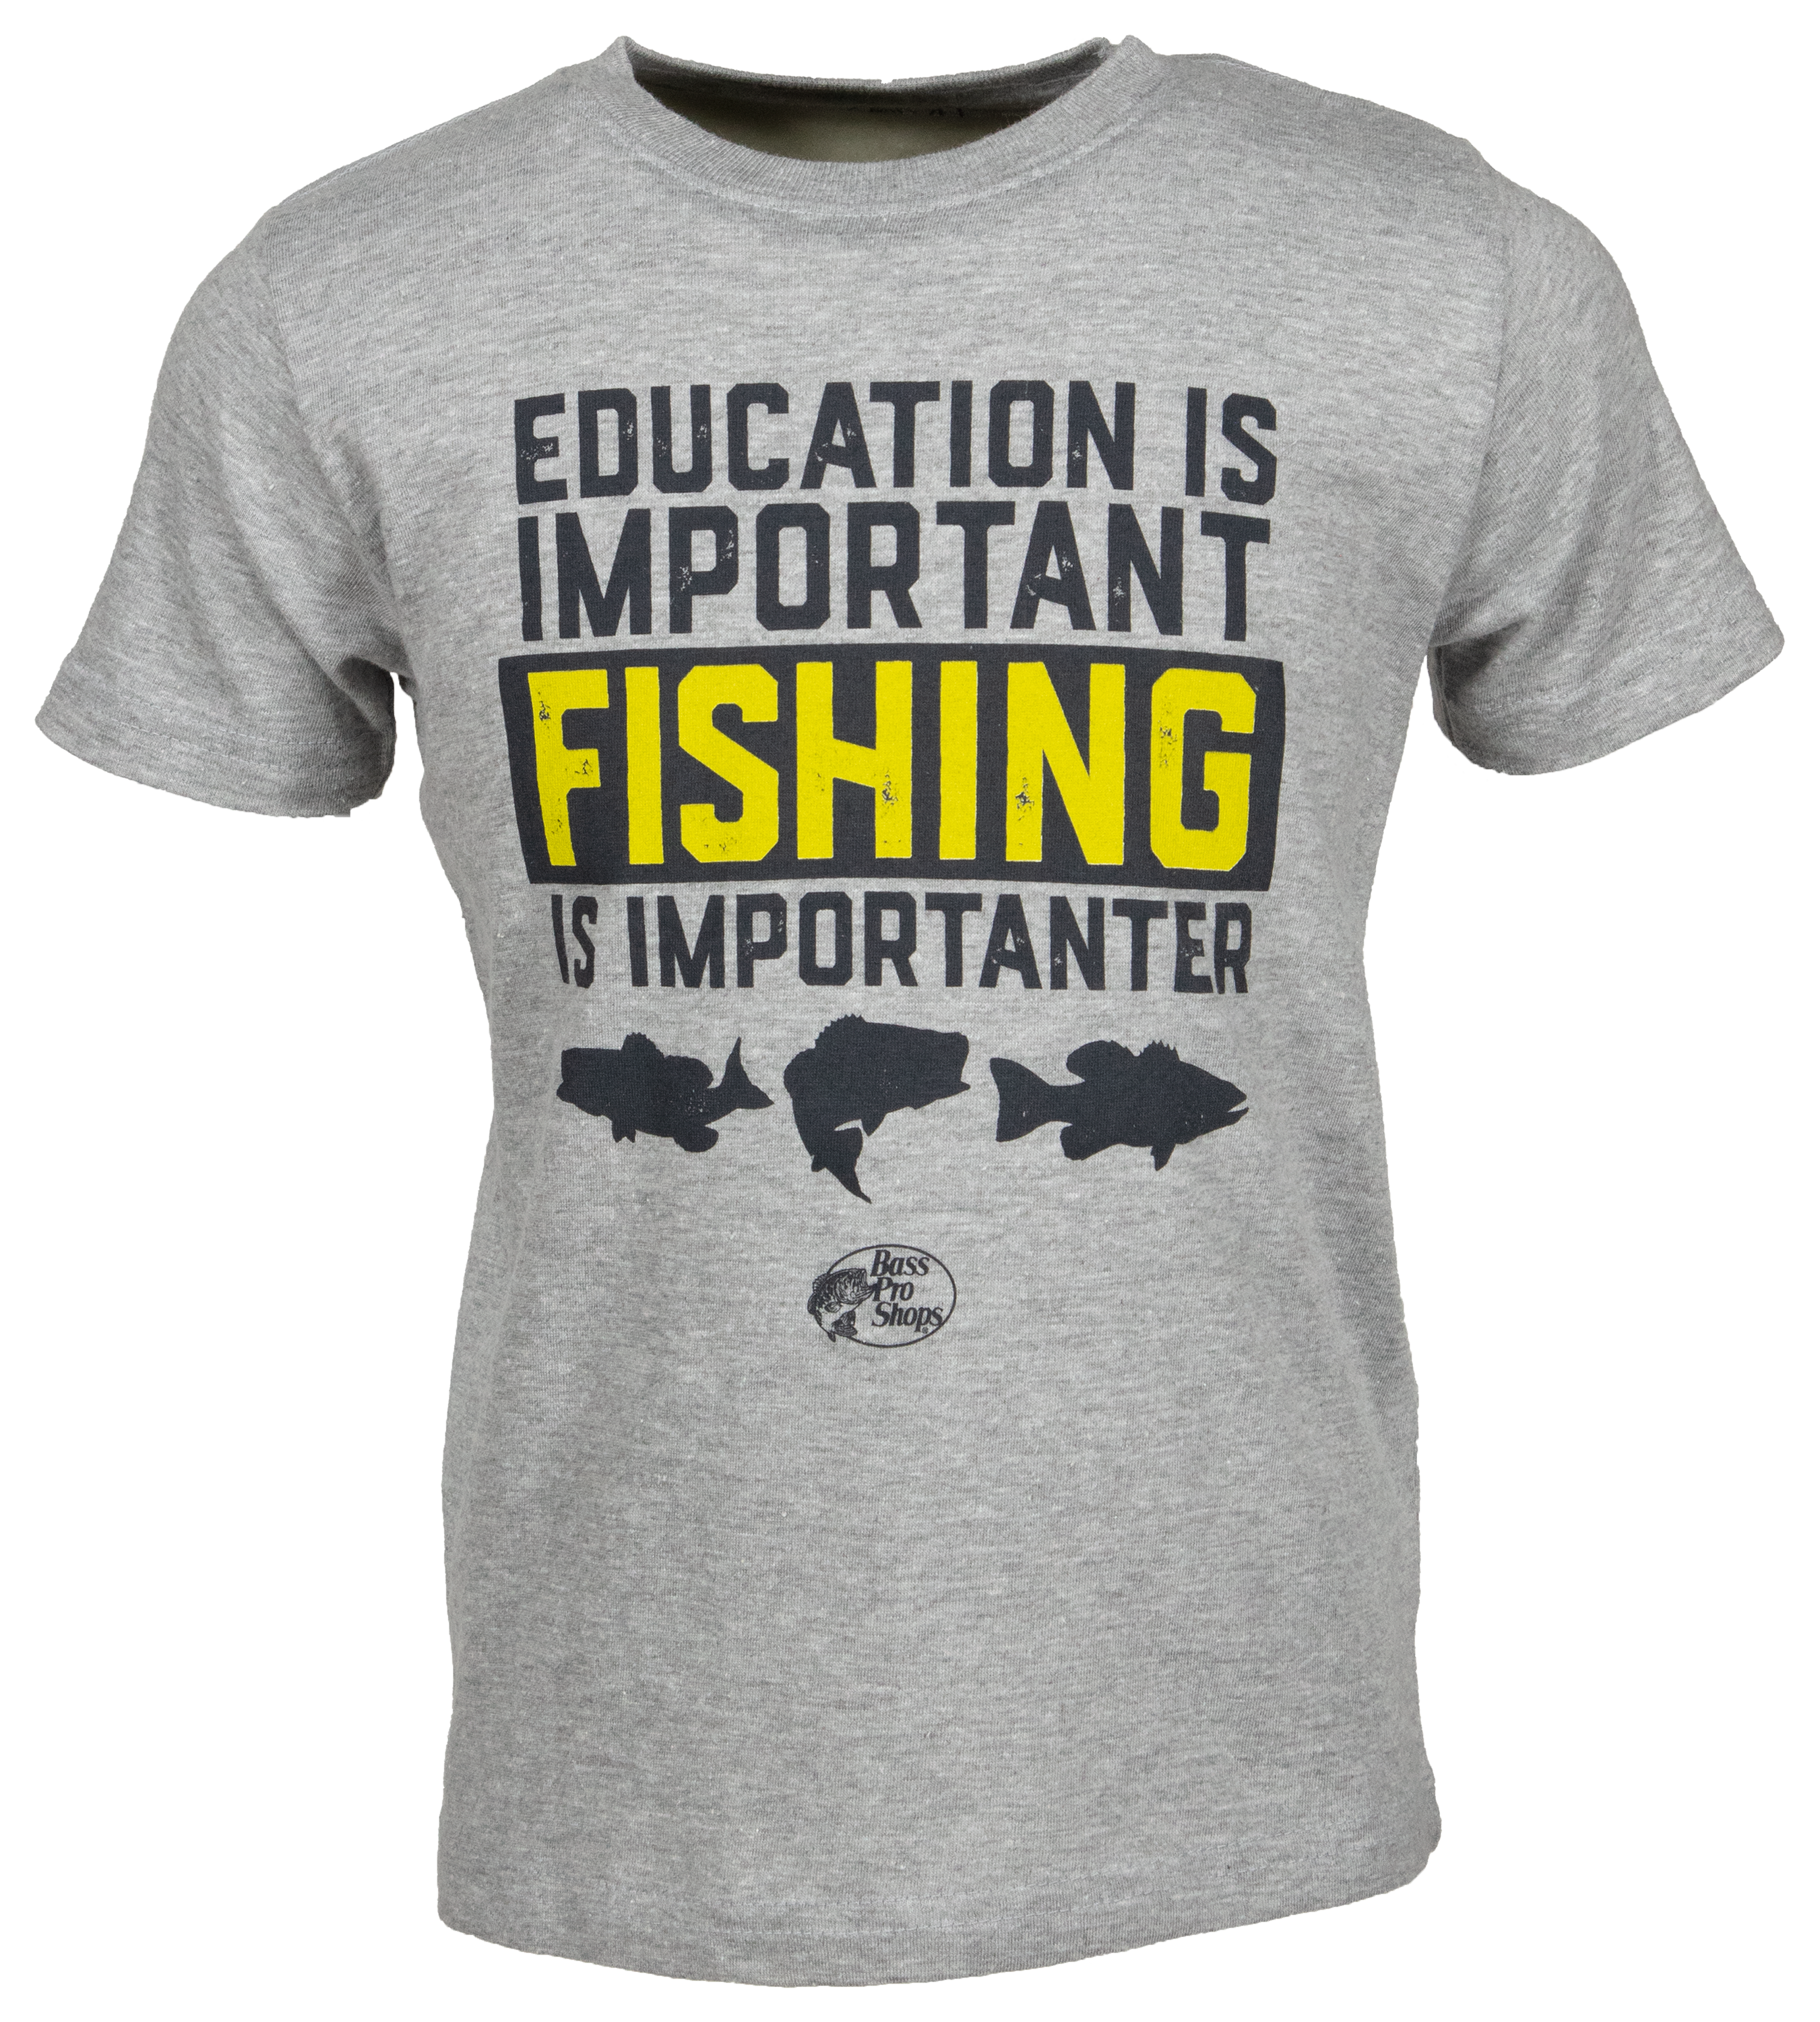 Outdoor Kids Fishing Education Short-Sleeve T-Shirt for Toddlers